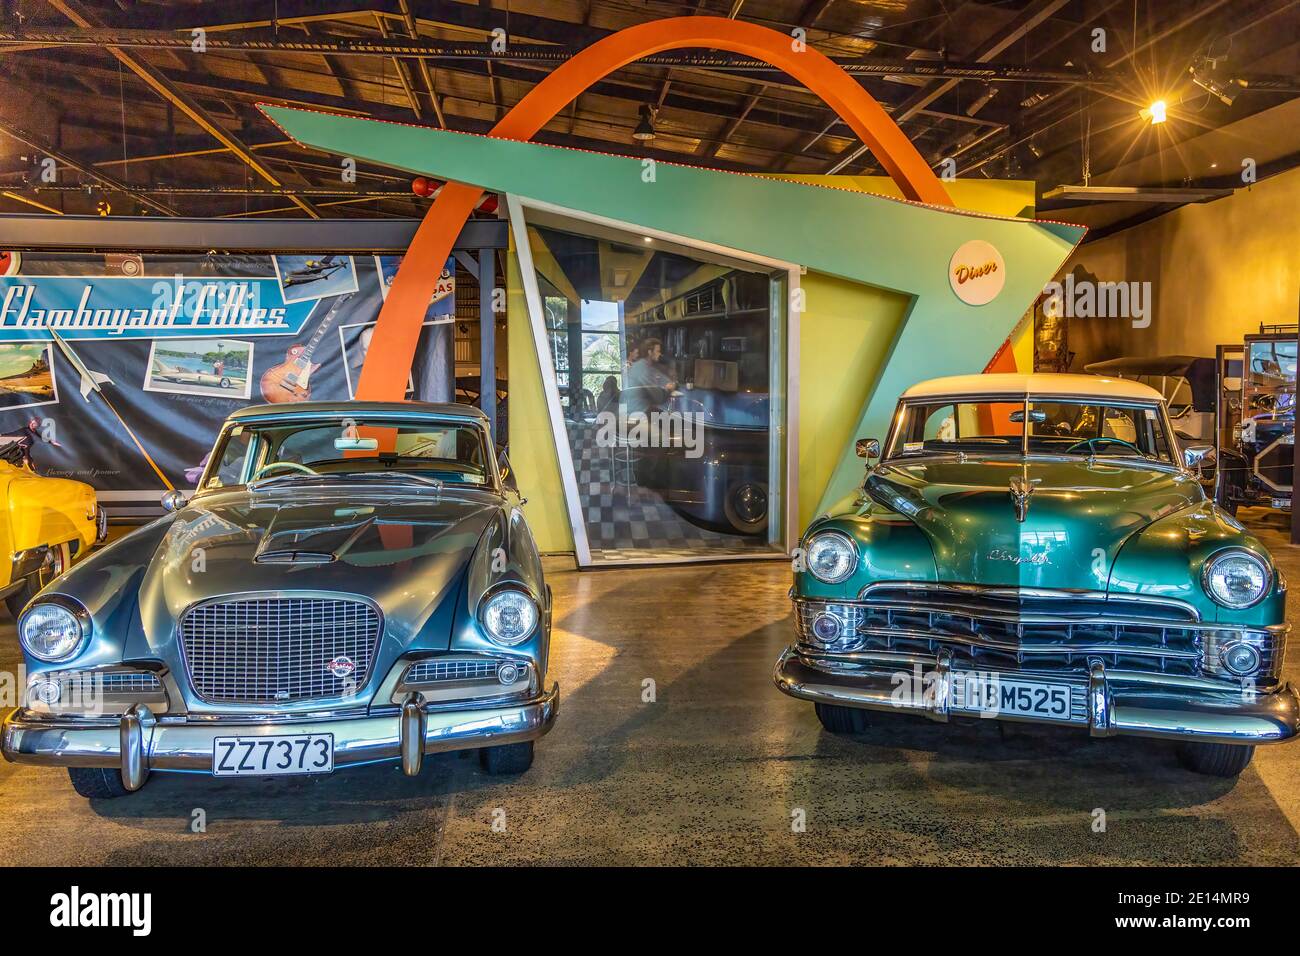 Nelson Classic Car Museum, South Island, New Zealand. A collection of classic and vintage vehicles.1961 Studebaker Hawk and 1950 Chrysler Newport. Stock Photo